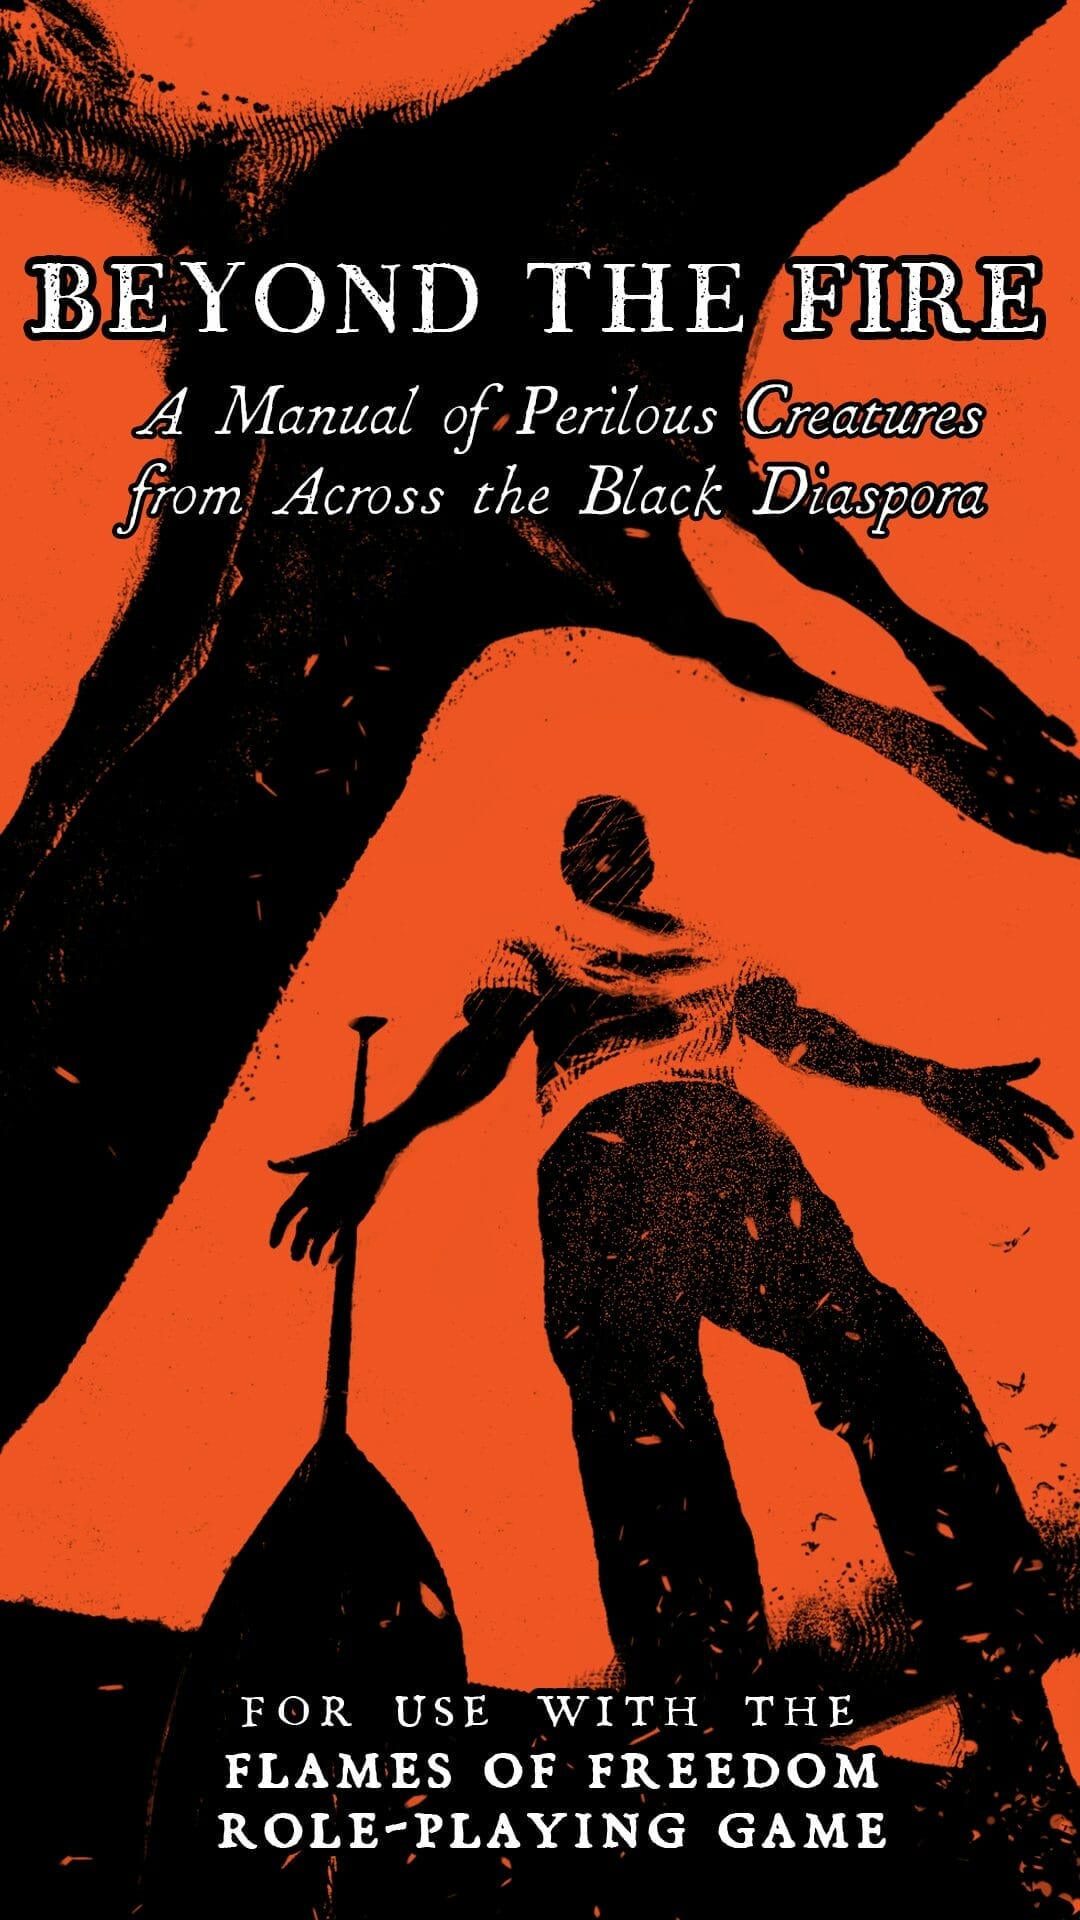 Beyond the Fire, A Manual of Perilous Creatures from Across the Black Diaspora